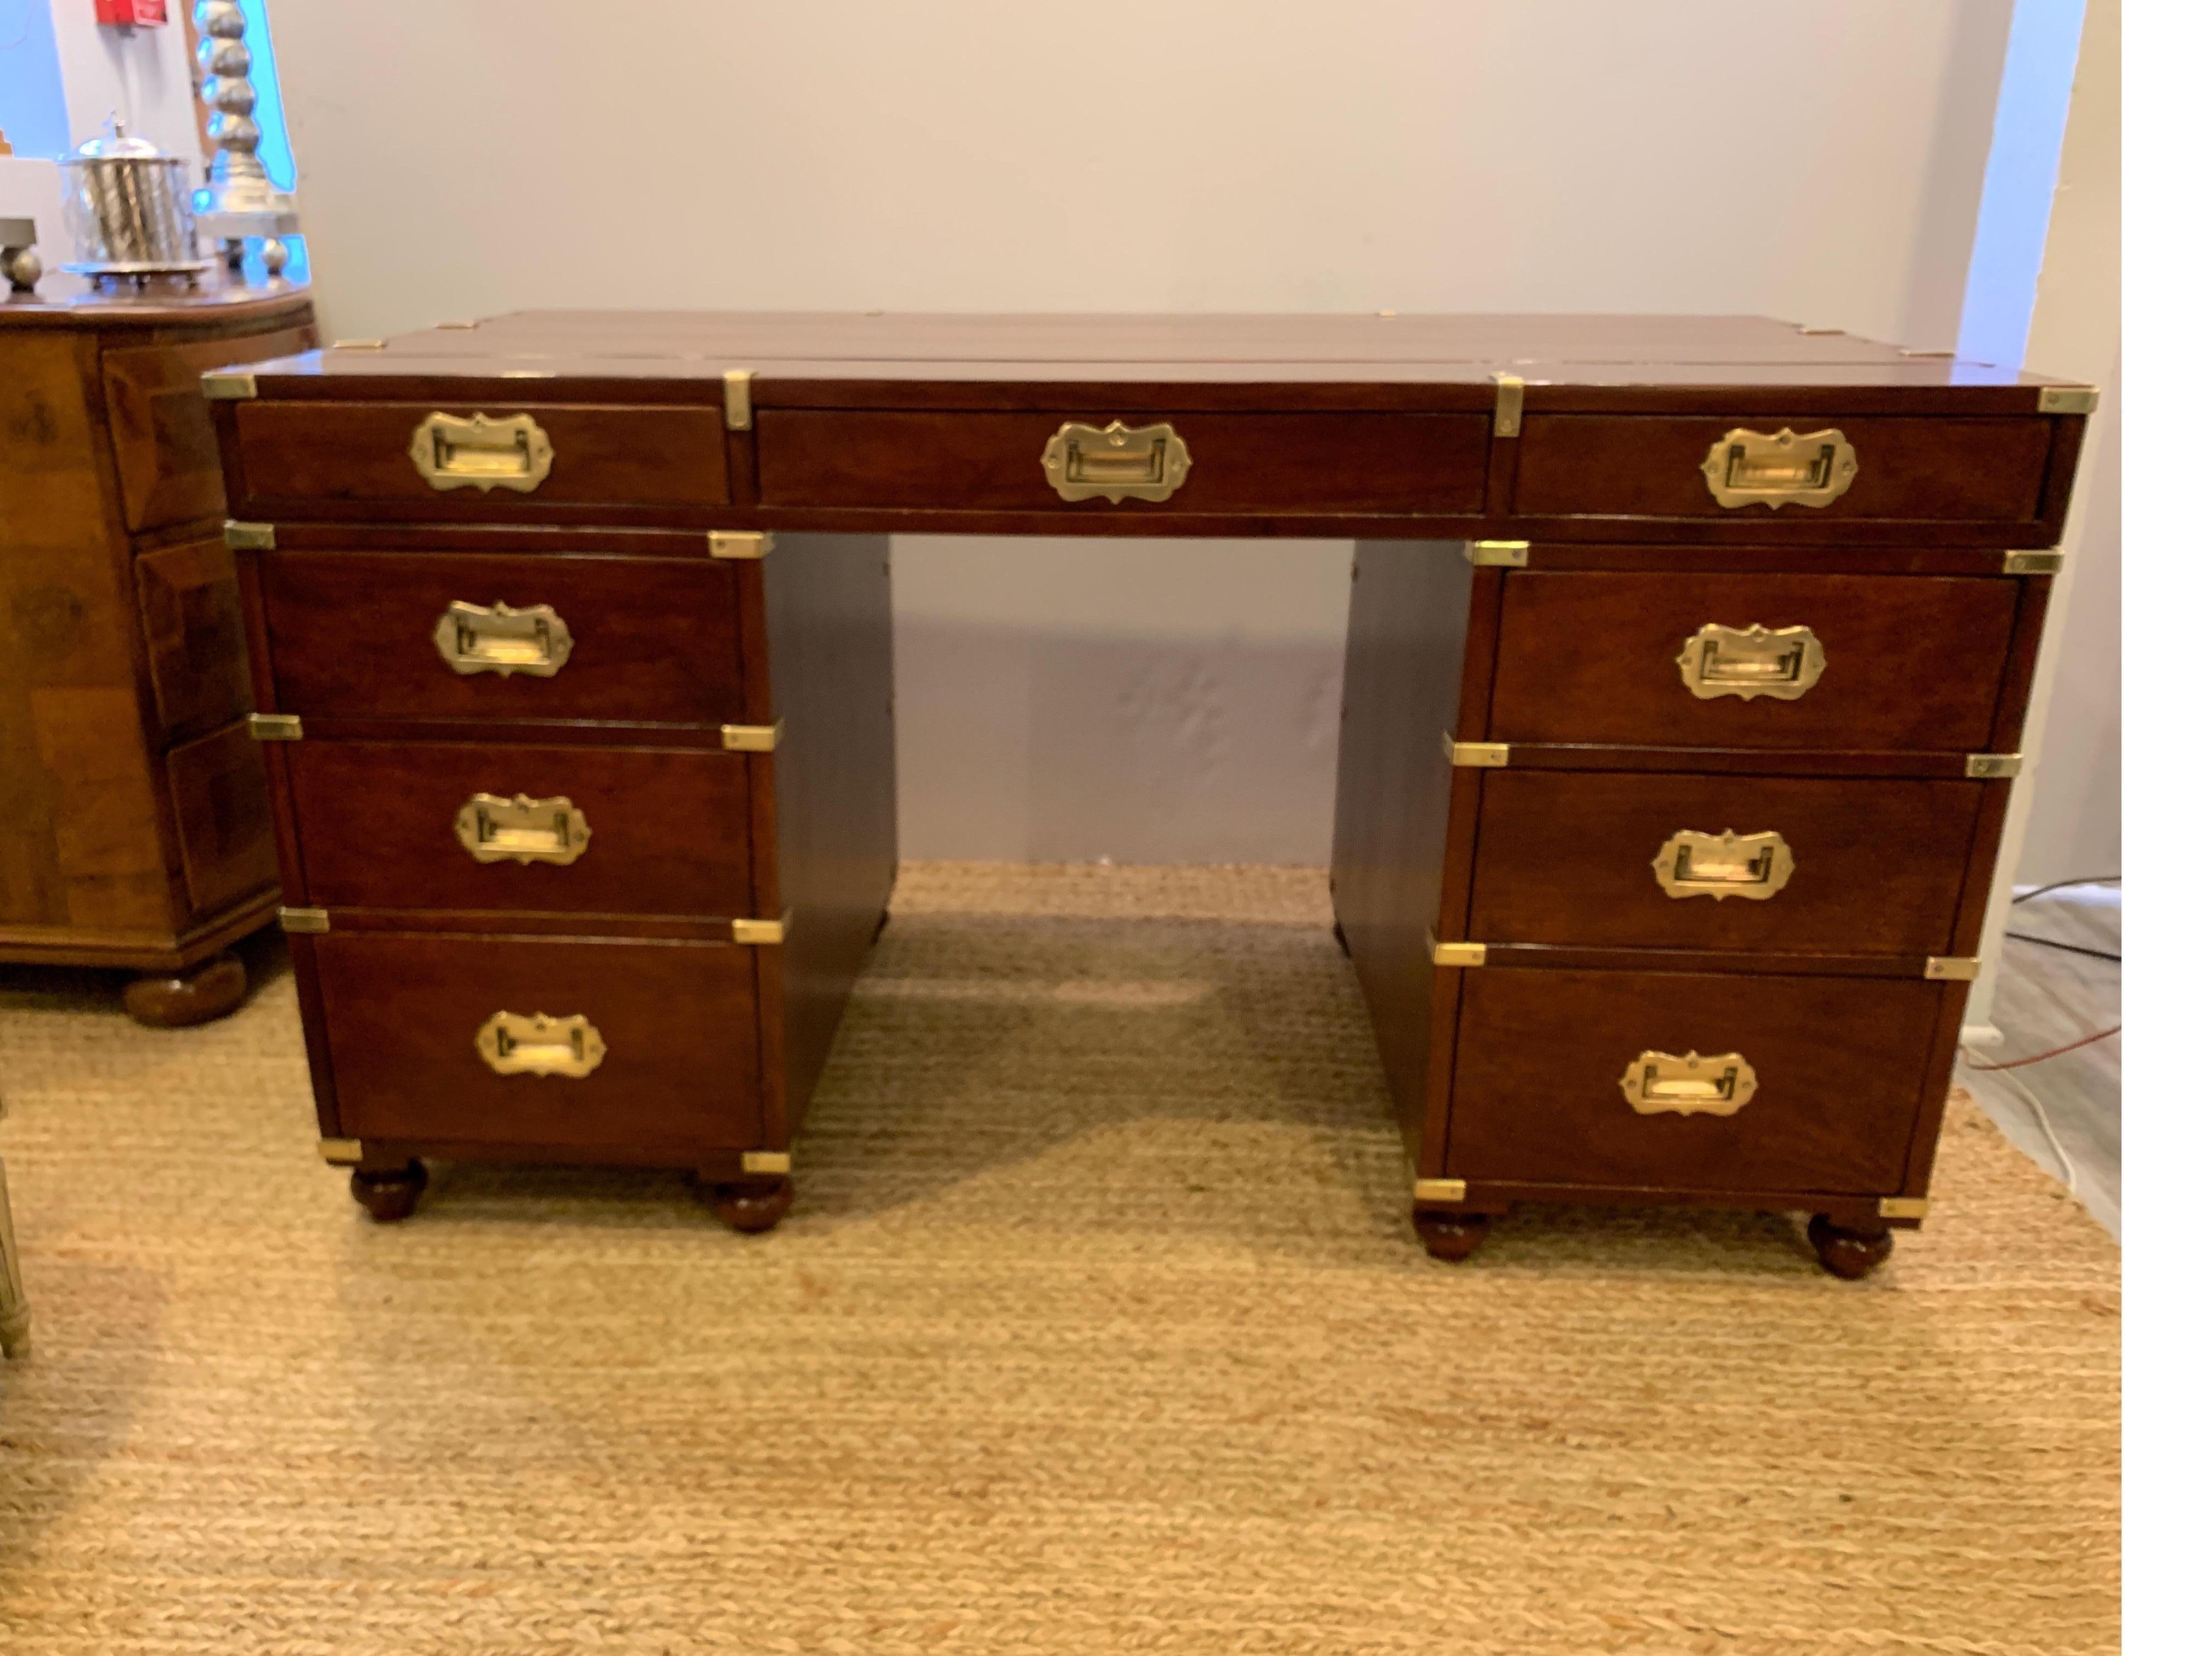 Classic campaign style double pedestal desk with brass mounts. The planked top with recent French polish, with dovetailed drawers and burnished brass handles and corner mounts. The desk has working drawers on the front and non working drawers on the